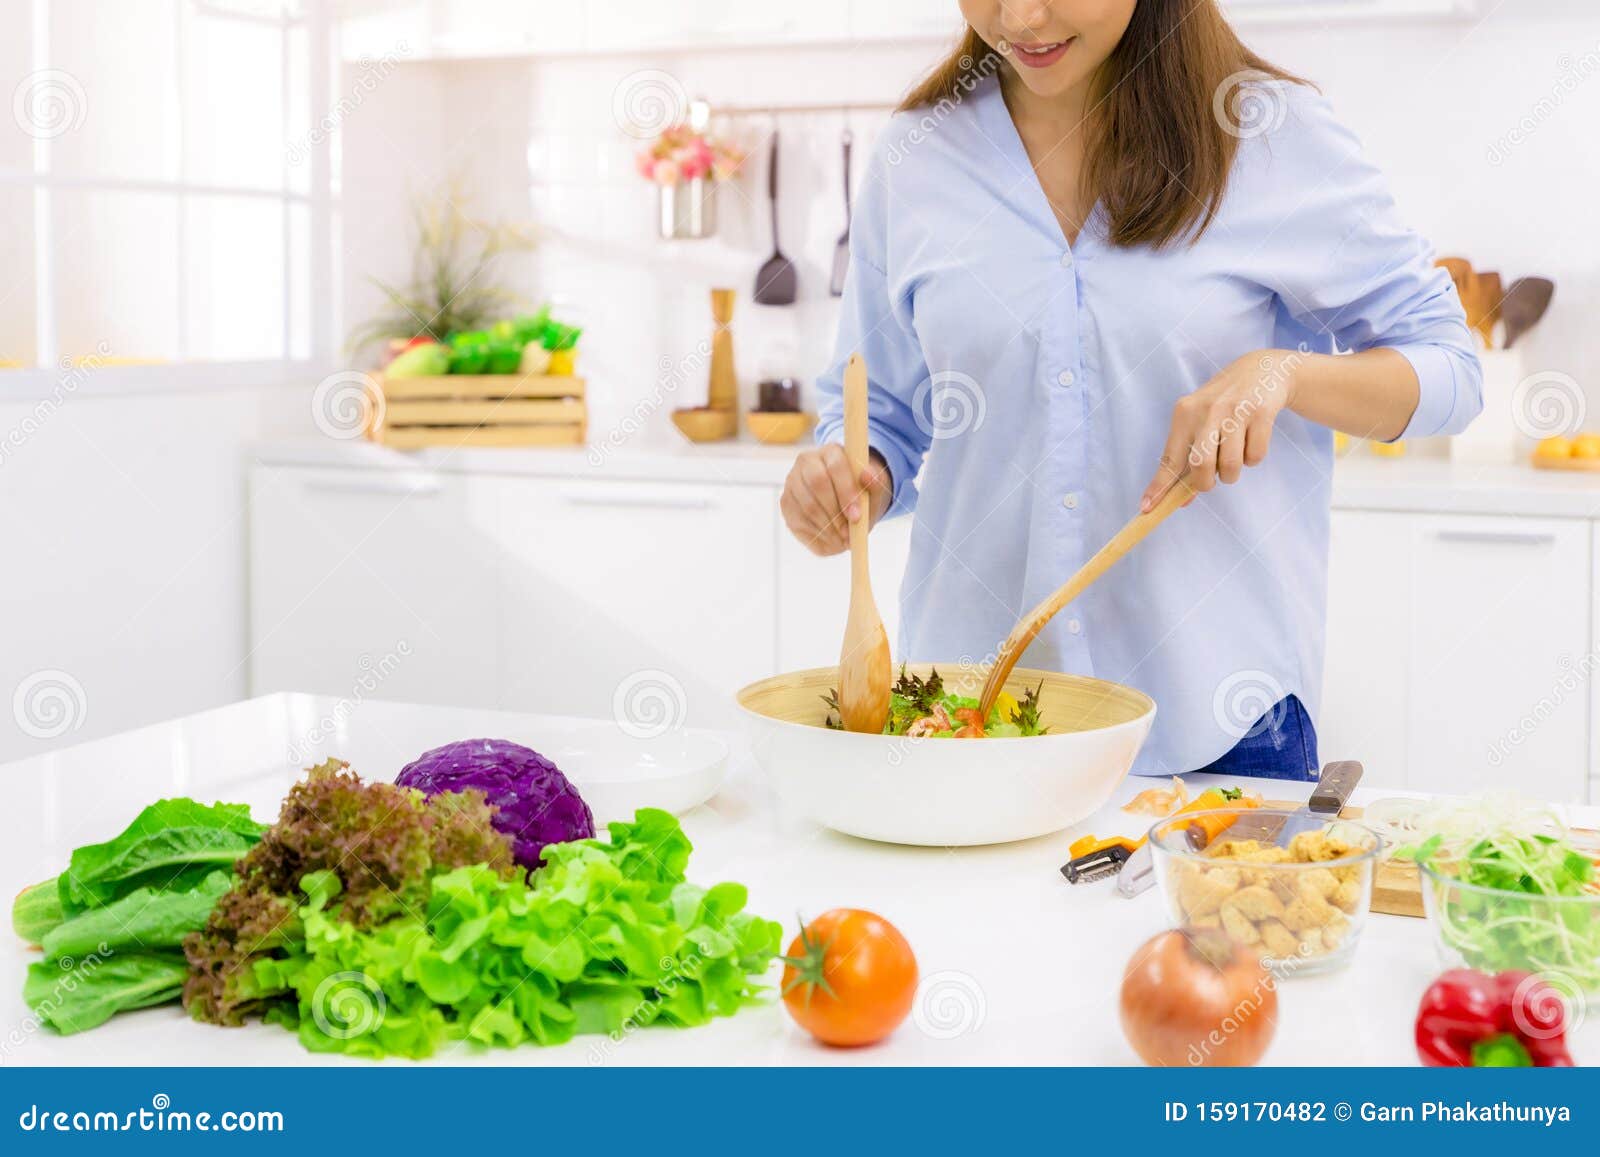 young woman cooking in the kitchen. healthy food - vegetable salad. diet. dieting concept. healthy lifestyle. cooking at home.